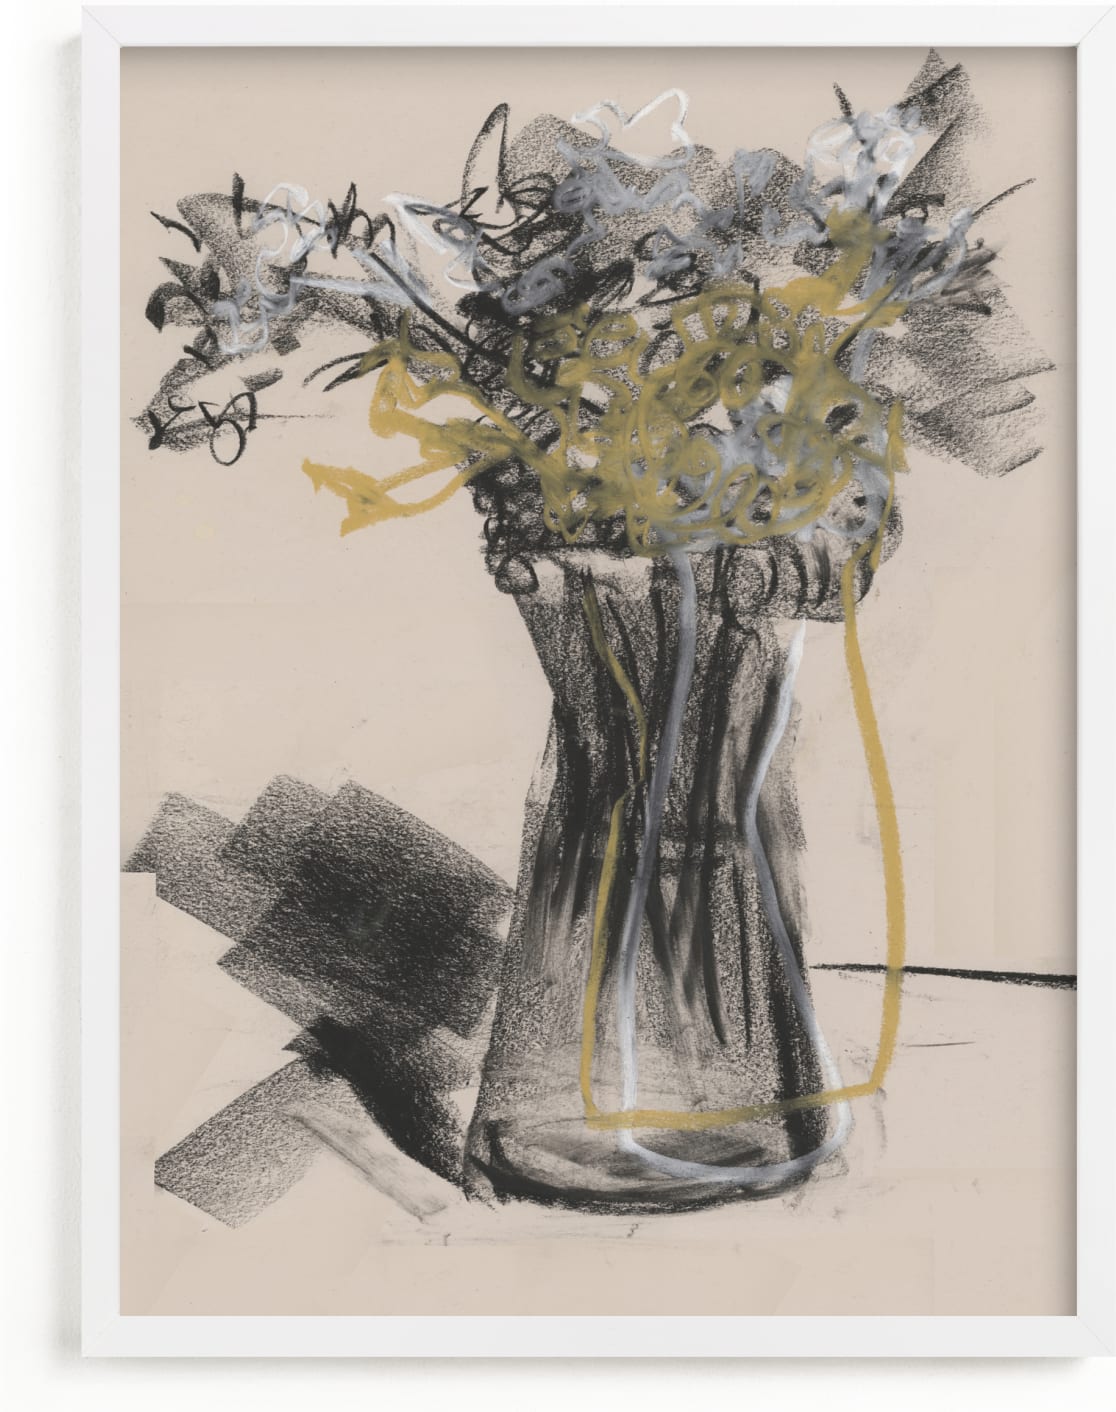 This is a yellow art by Bethania Lima called Vase of flower gestural drawing exercise.